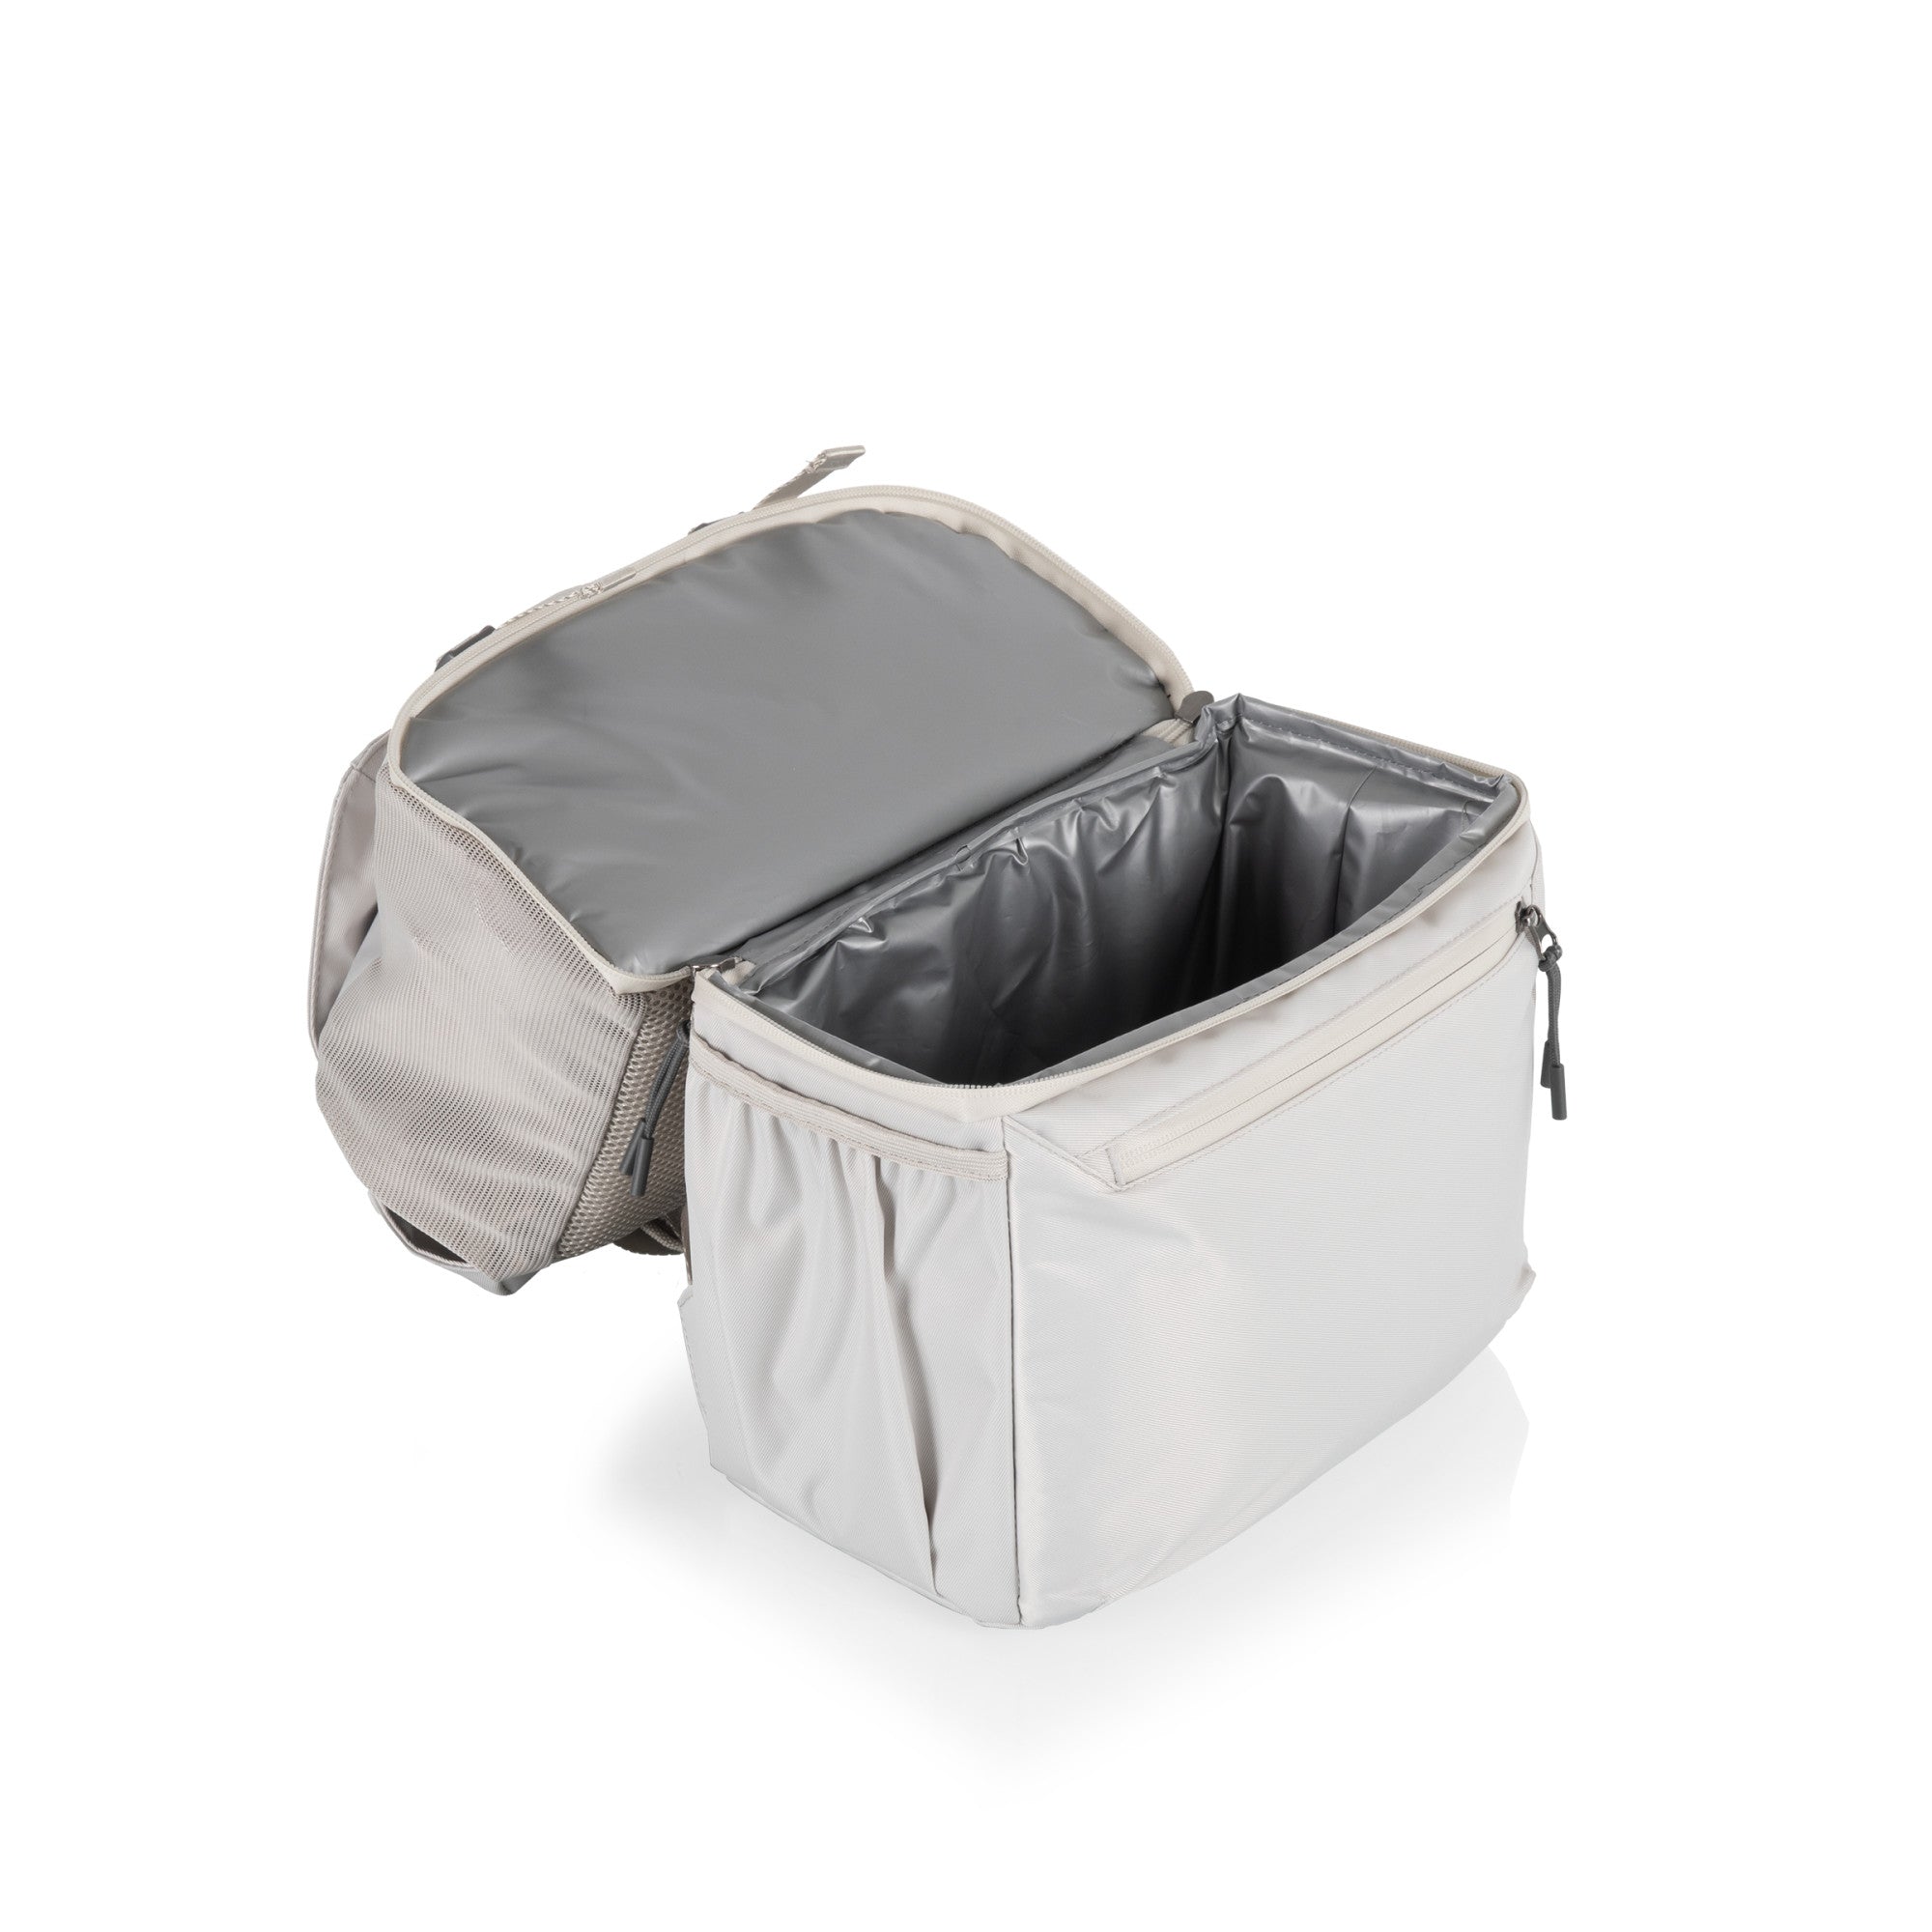 Star Wars - Tarana Lunch Bag Cooler with Utensils – PICNIC TIME